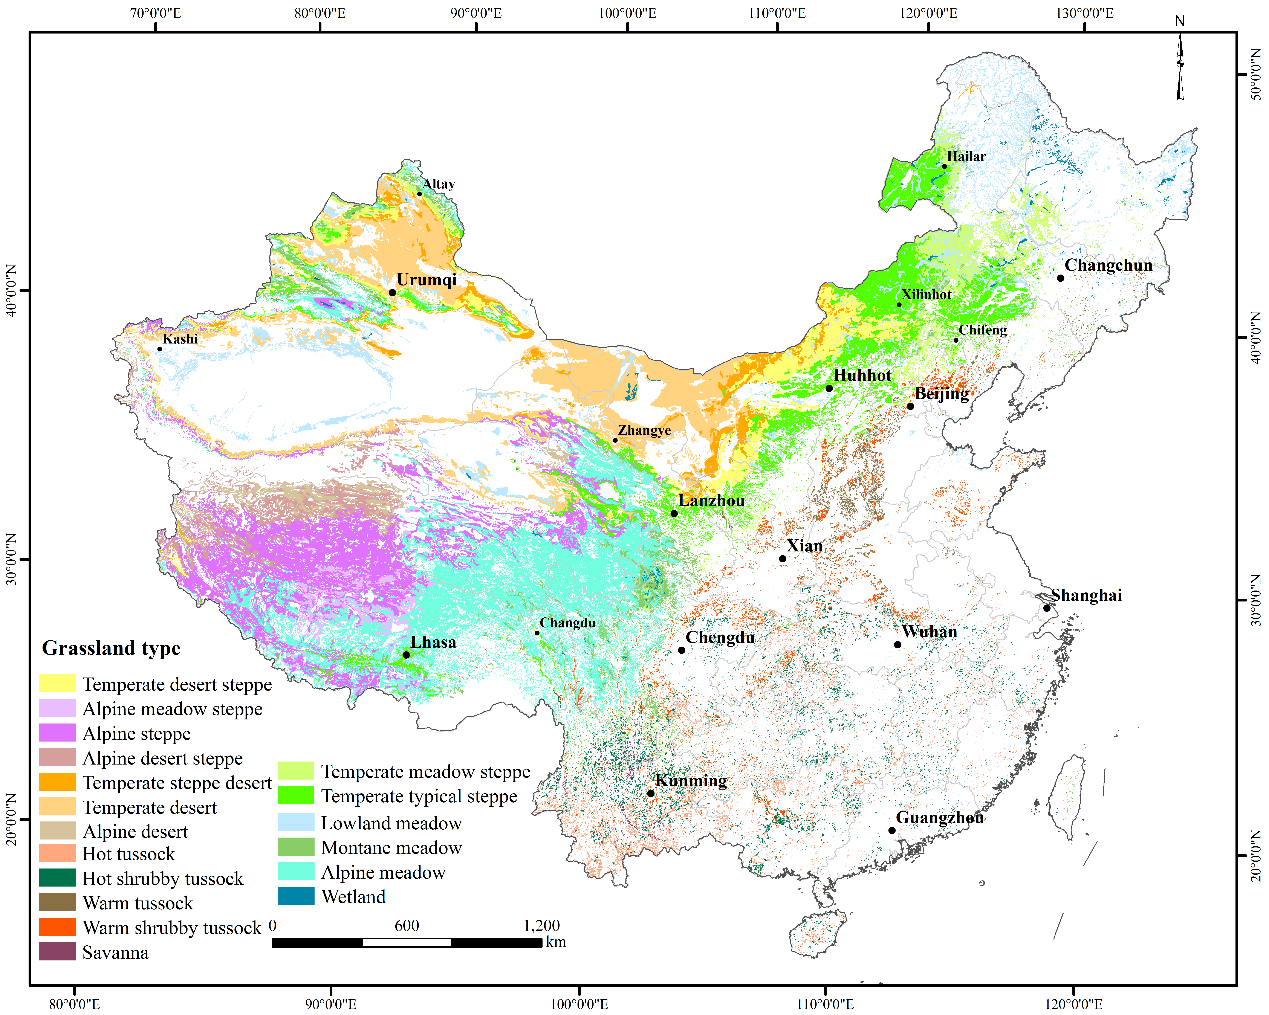 map of china and its grasslands